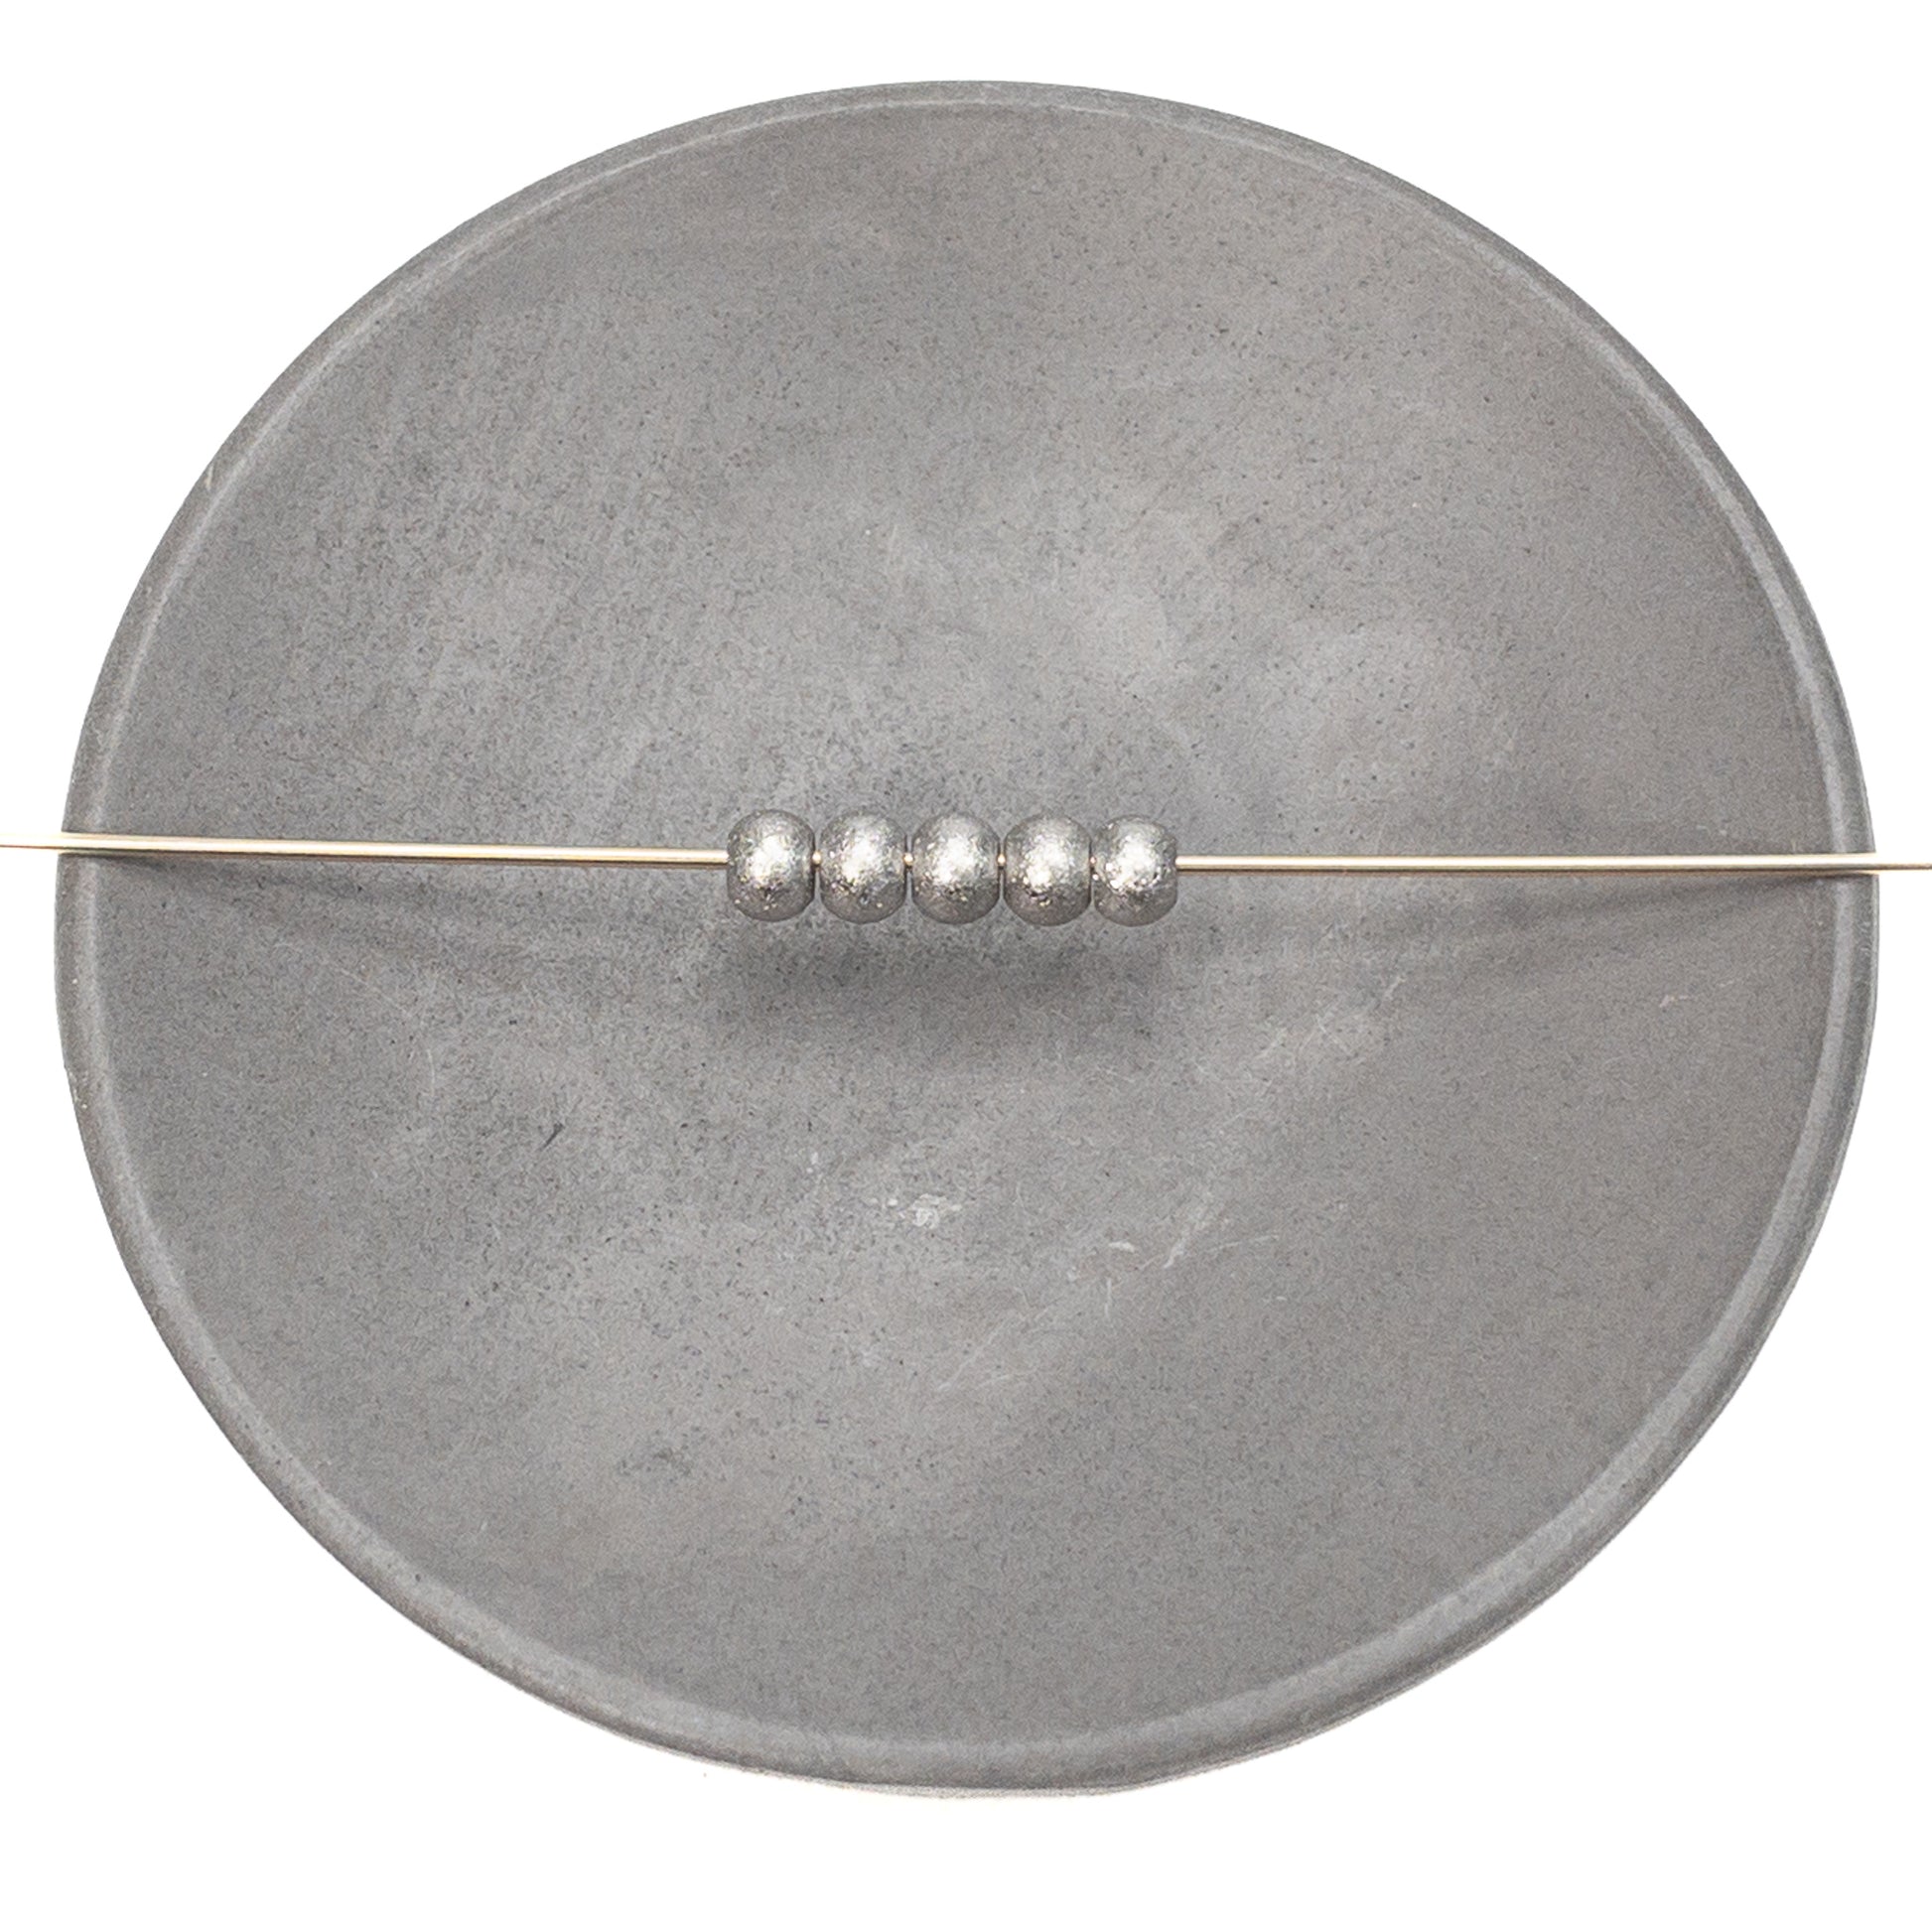 Stardust 4mm Round with 1.6mm Hole Bead (Stainless Steel) - 10 pcs.